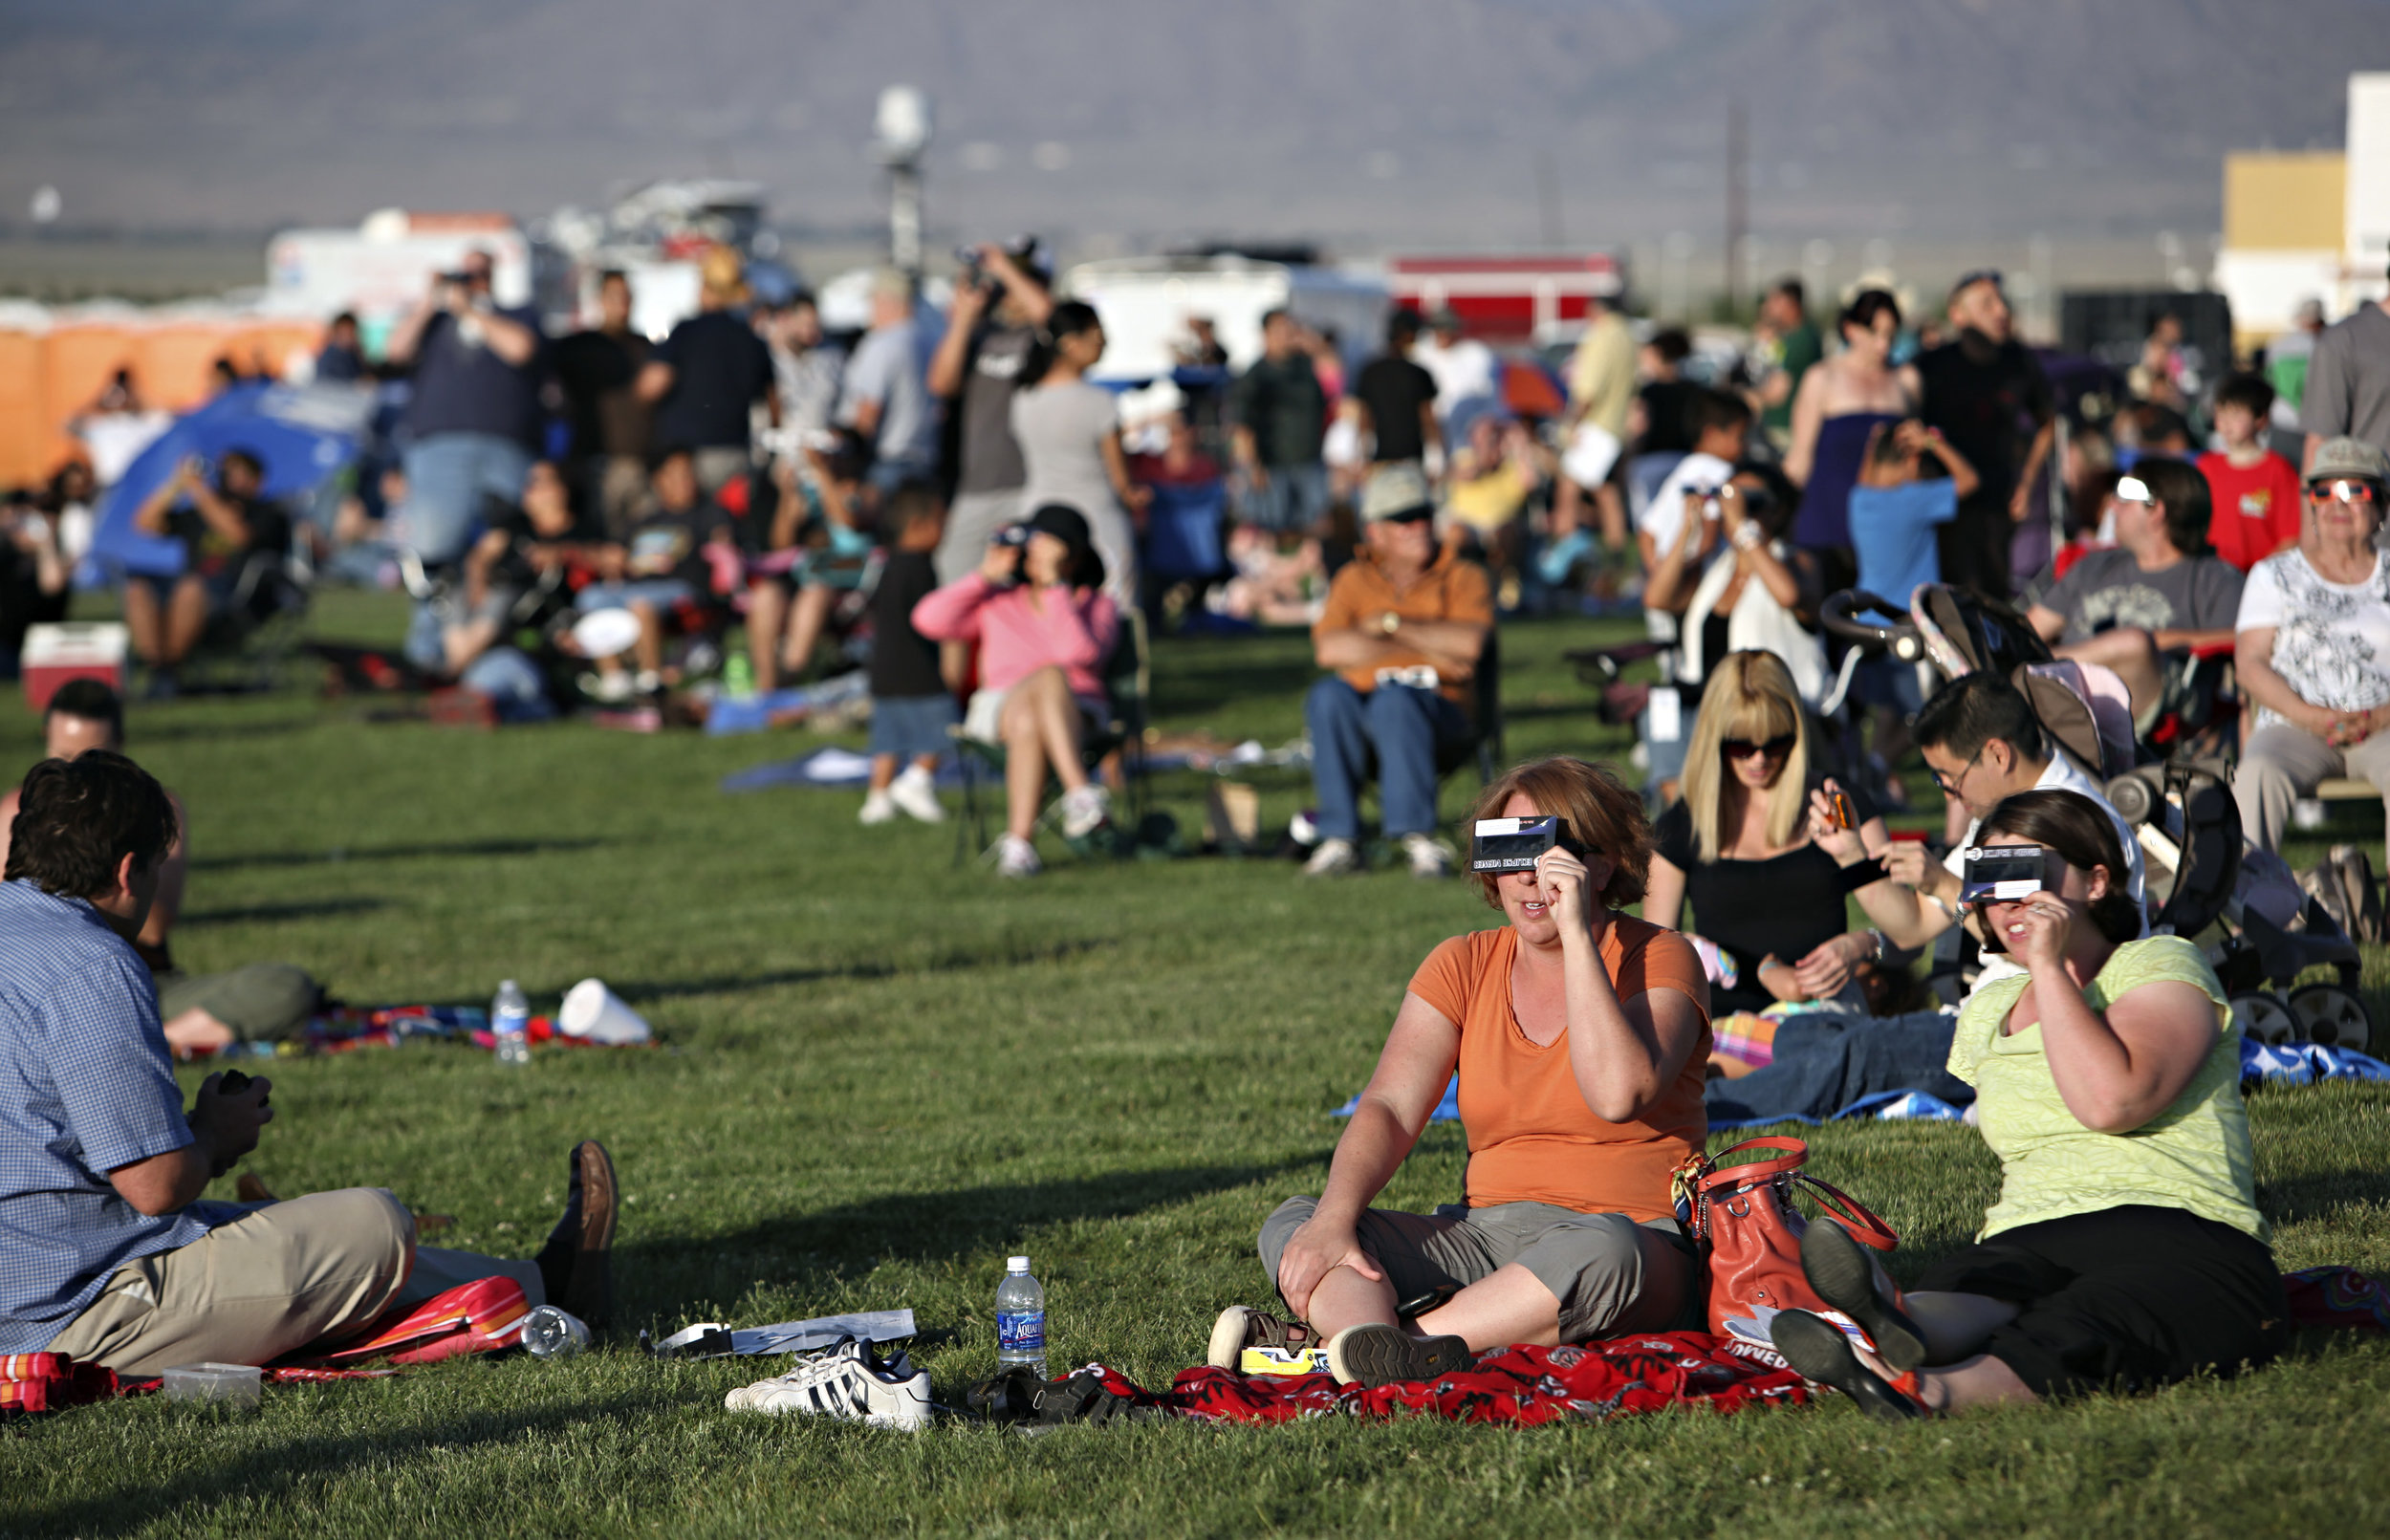  From right, Deanna Creighton and Crystal Humble, both from Albuquerque, watch the annular solar eclipse during the eclipse viewing party near the Hard Rock Casino Presents the Pavilion, Sunday, May 20, 2012, in Albuquerque, NM. (Morgan Petroski/Albu